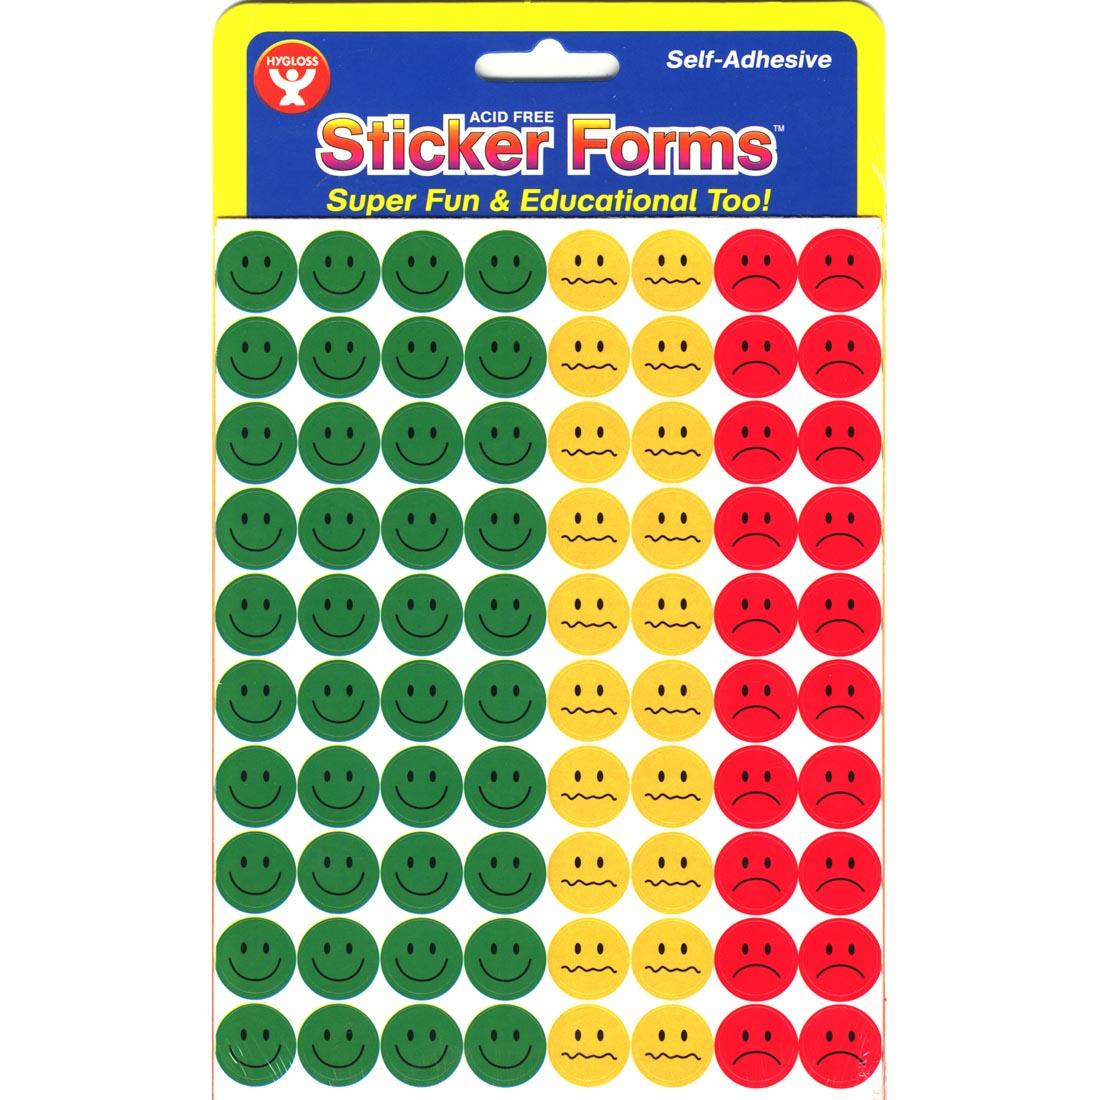 Behavior Stickers feature green smileys, yellow uncertain faces and red frowns